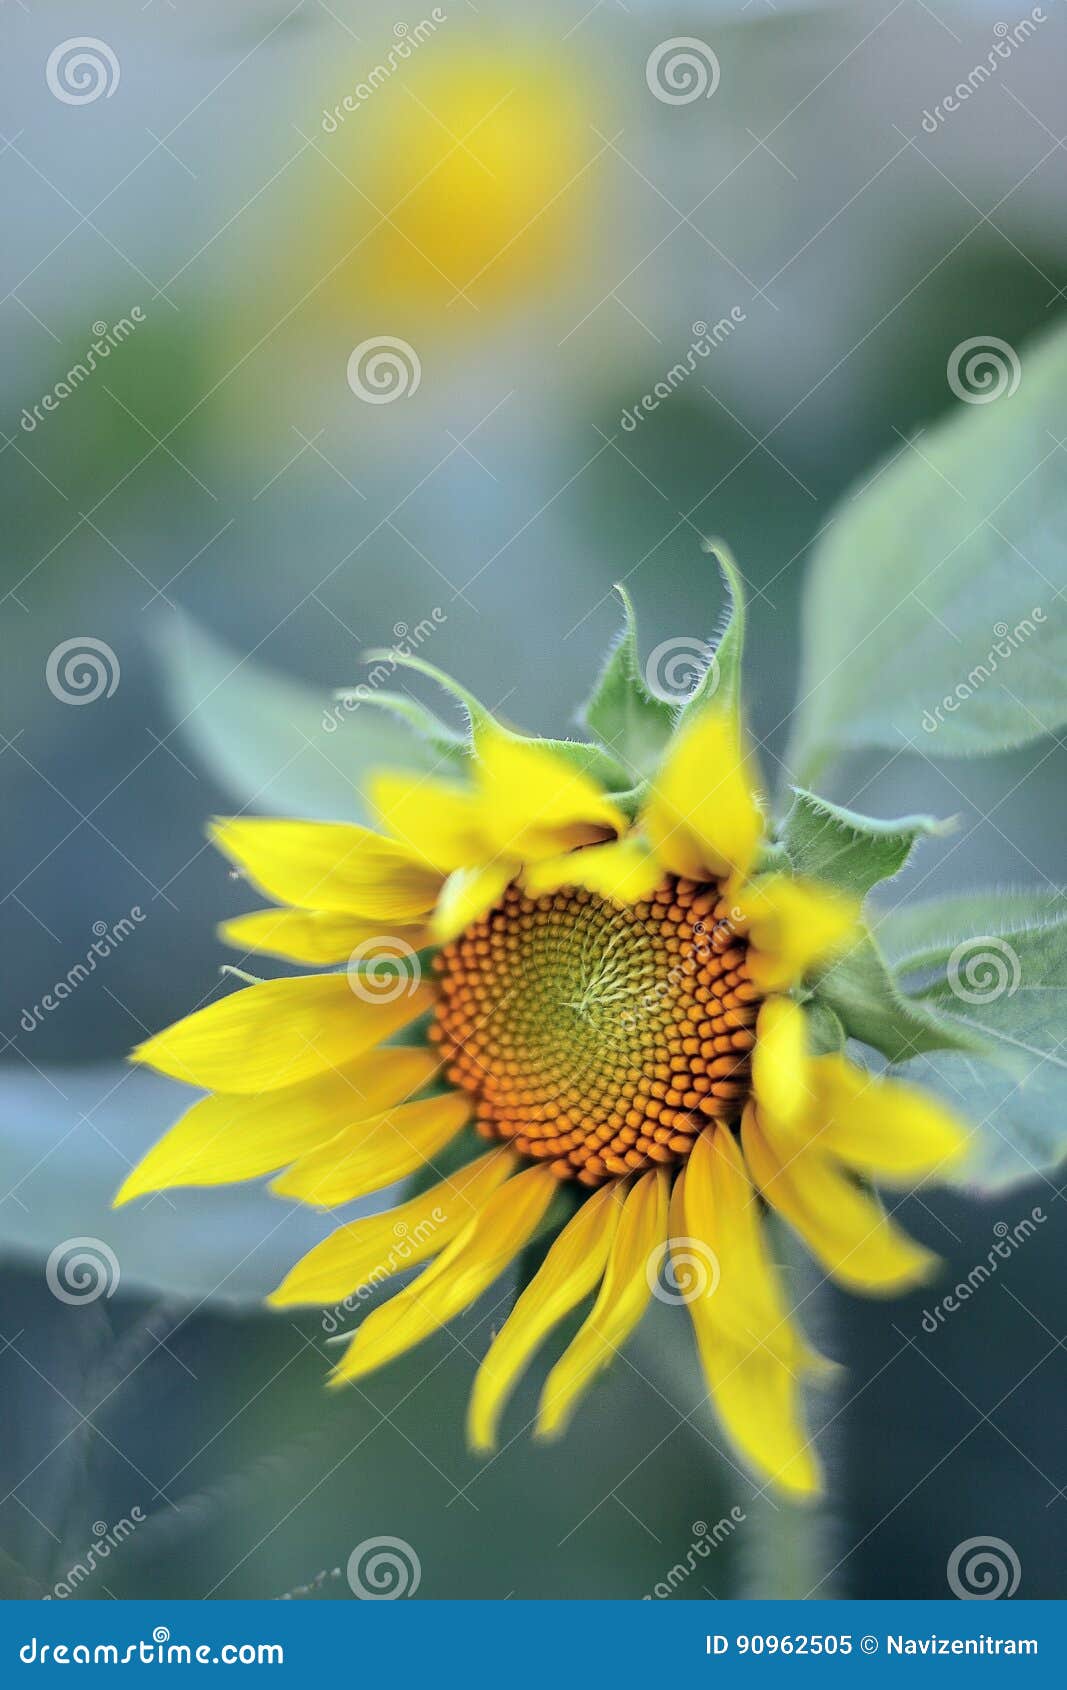 Sunflower Profile stock image. Image of softtexture, sunfloweroil - 90962505